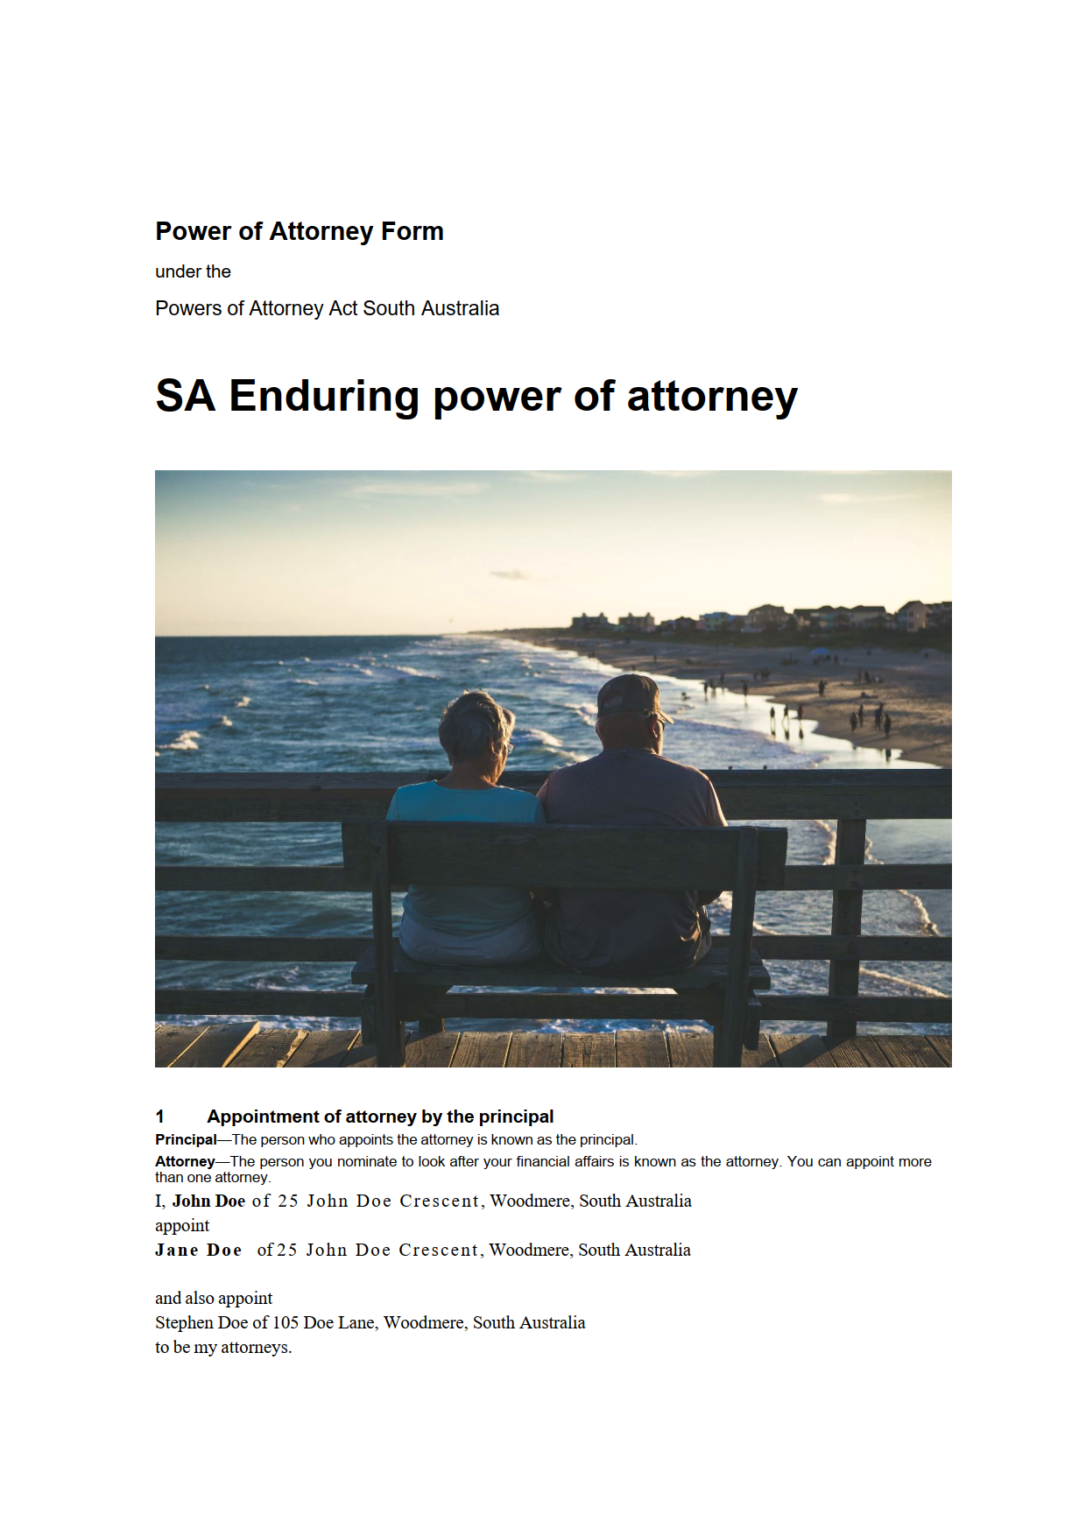 being-an-attorney-under-an-enduring-power-of-attorney